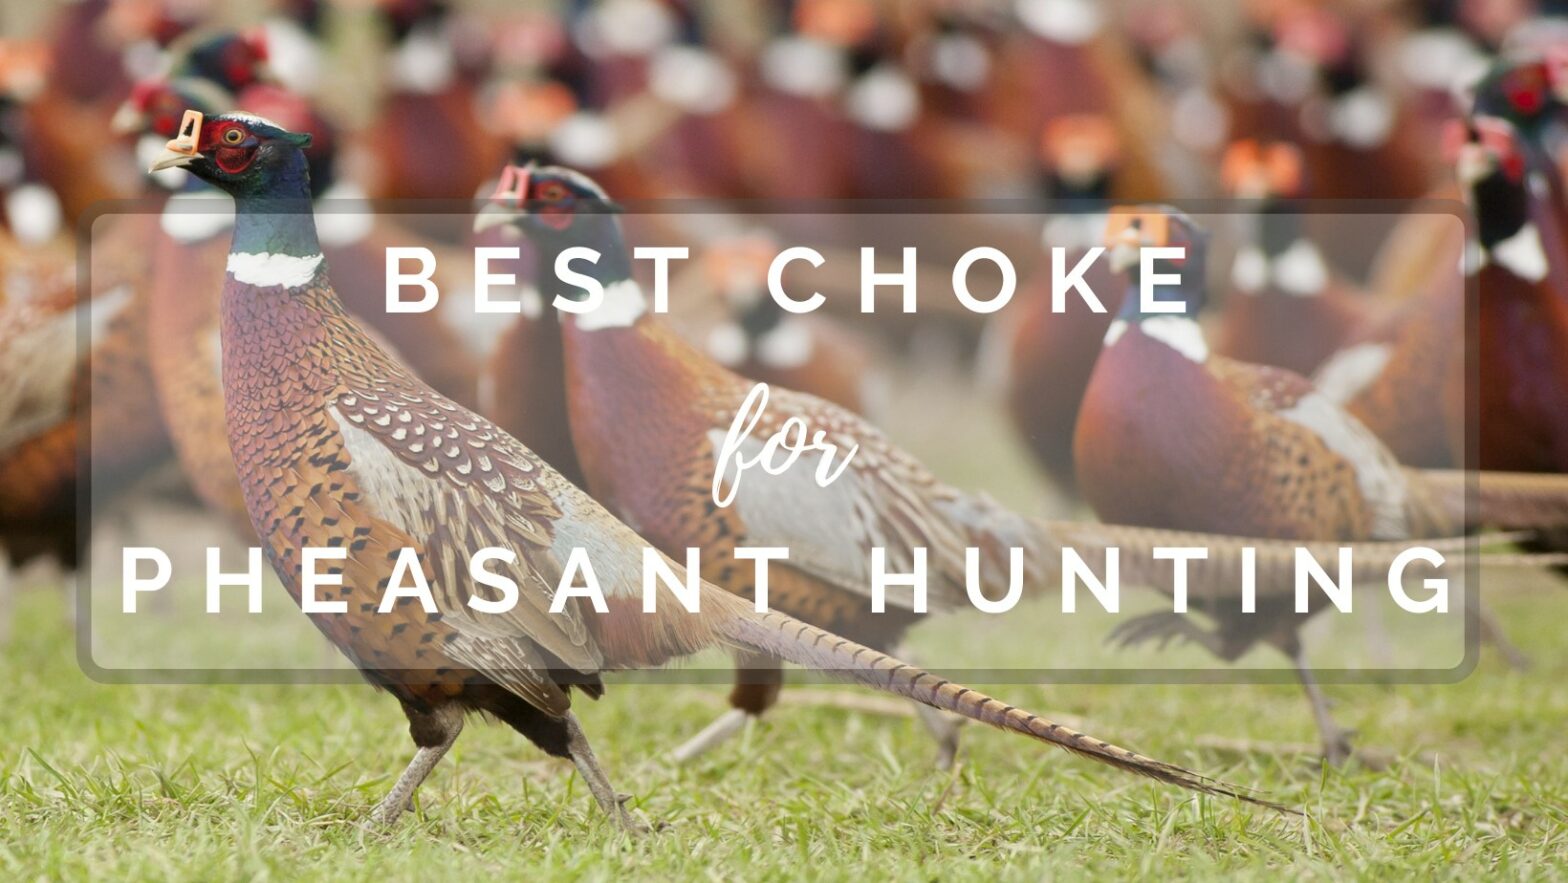 5 Best Choke For Pheasant Hunting Reviewed For 2022